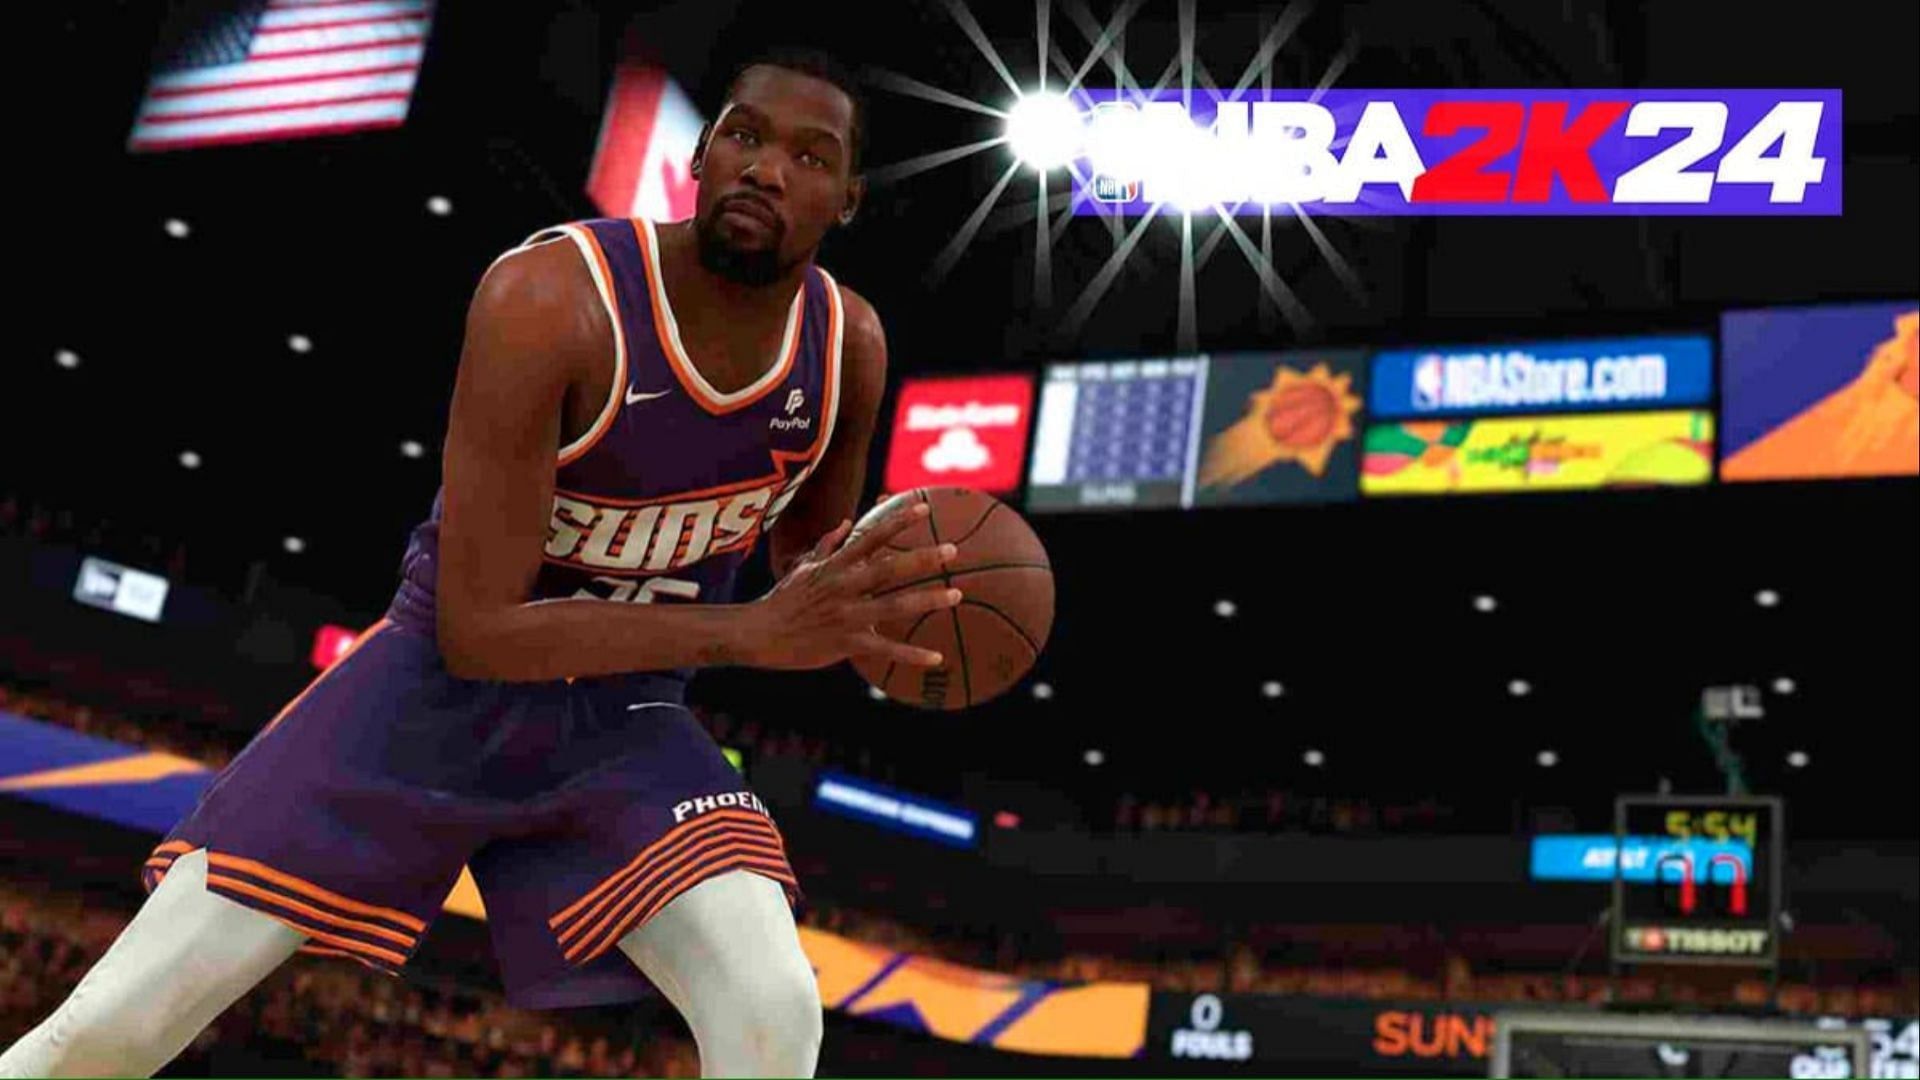 How to claim free NBA store item in NBA 2K20 